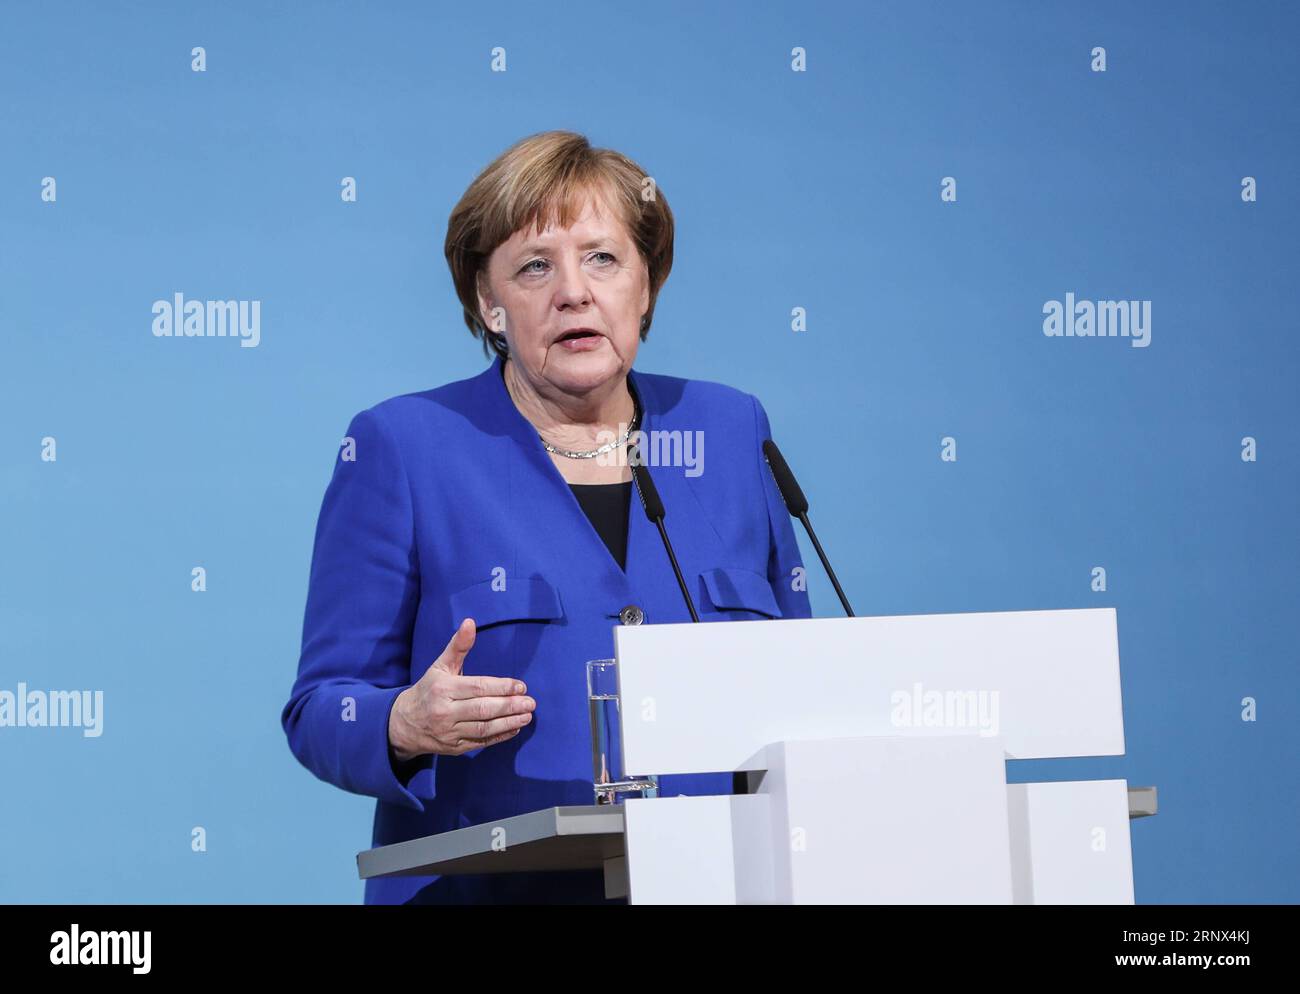 (180112) -- BERLIN, Jan. 12, 2018 -- German Chancellor and leader of German Christian Democratic Union (CDU) Angela Merkel speaks during a joint press conference after coalition talks at the headquarters of SPD, in Berlin, Germany, on Jan. 12, 2018. German Chancellor Angela Merkel s conservatives and the Social Democrats (SPD) on Friday achieved a breakthrough in their exploratory talks aimed at forming a new coalition government, local media reported. )(srb) GERMANY-BERLIN-COALITION TALKS-BREAKTHROUGH ShanxYuqi PUBLICATIONxNOTxINxCHN Stock Photo